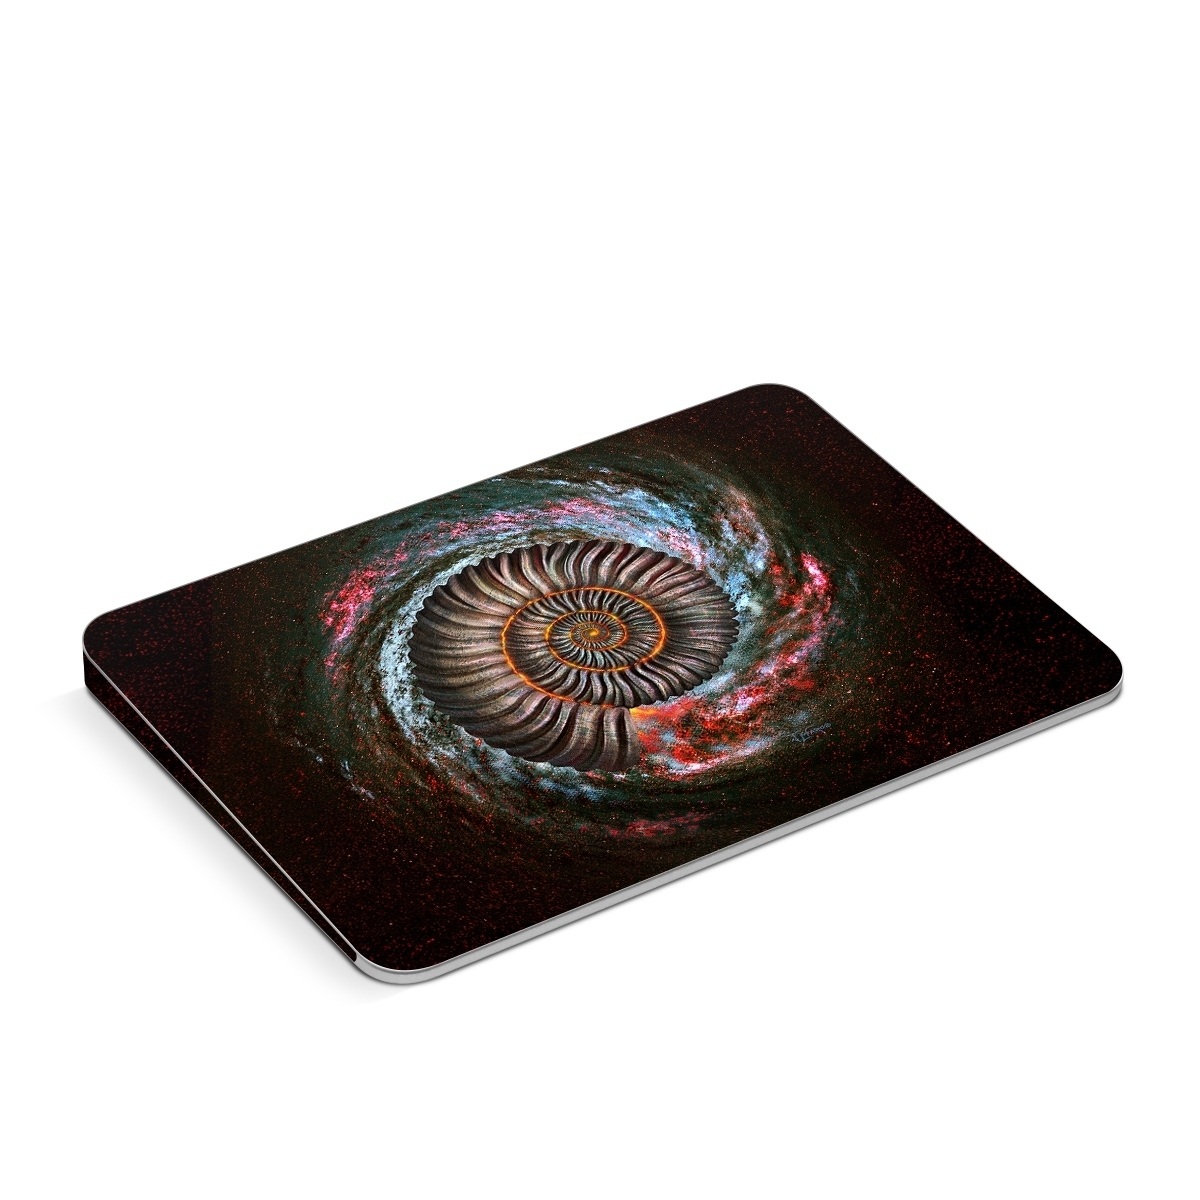 Apple Magic Trackpad Skin design of Spiral, Fractal art, Vortex, Circle, Art, Ammonoidea, with black, brown, red, white, blue, green colors